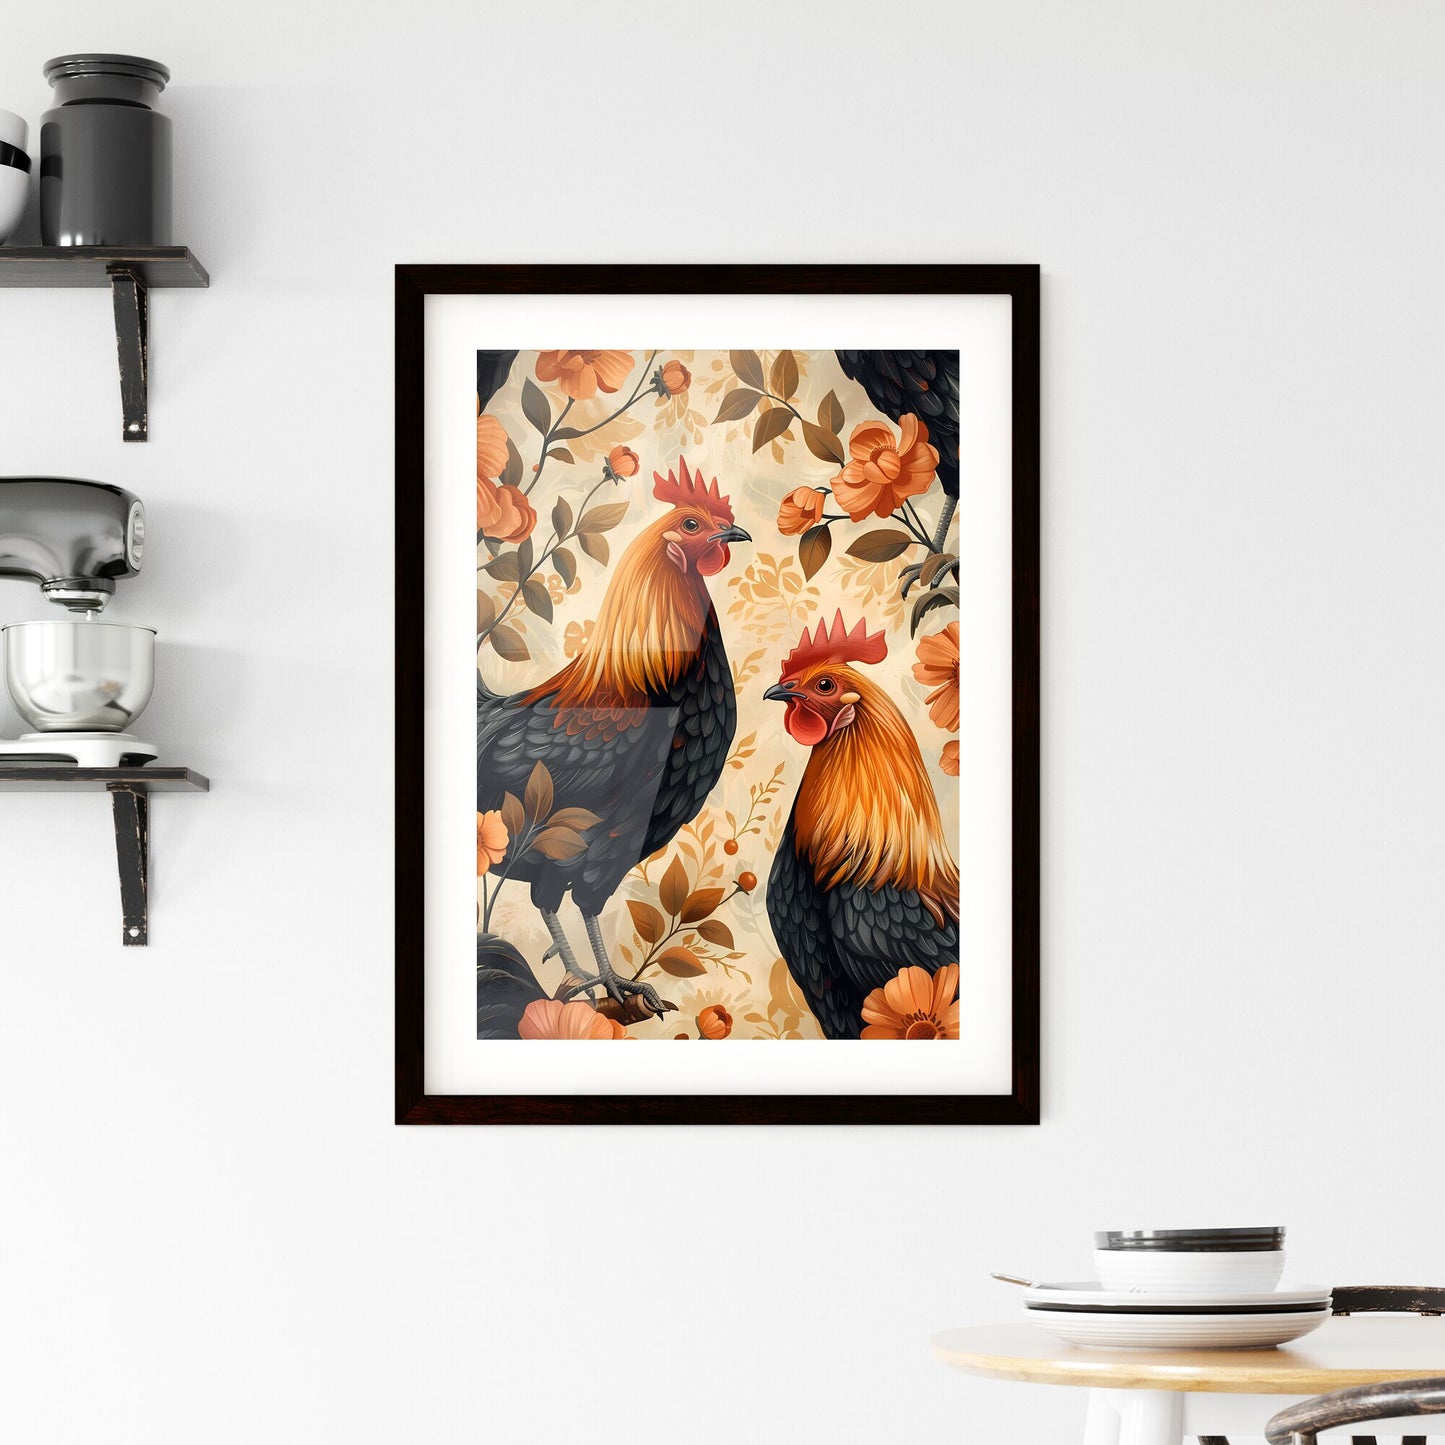 Artful Birthday Greeting Card Design Featuring Black Copper Maran Chickens, Feminine Browns and Hunter Orange Accents Default Title